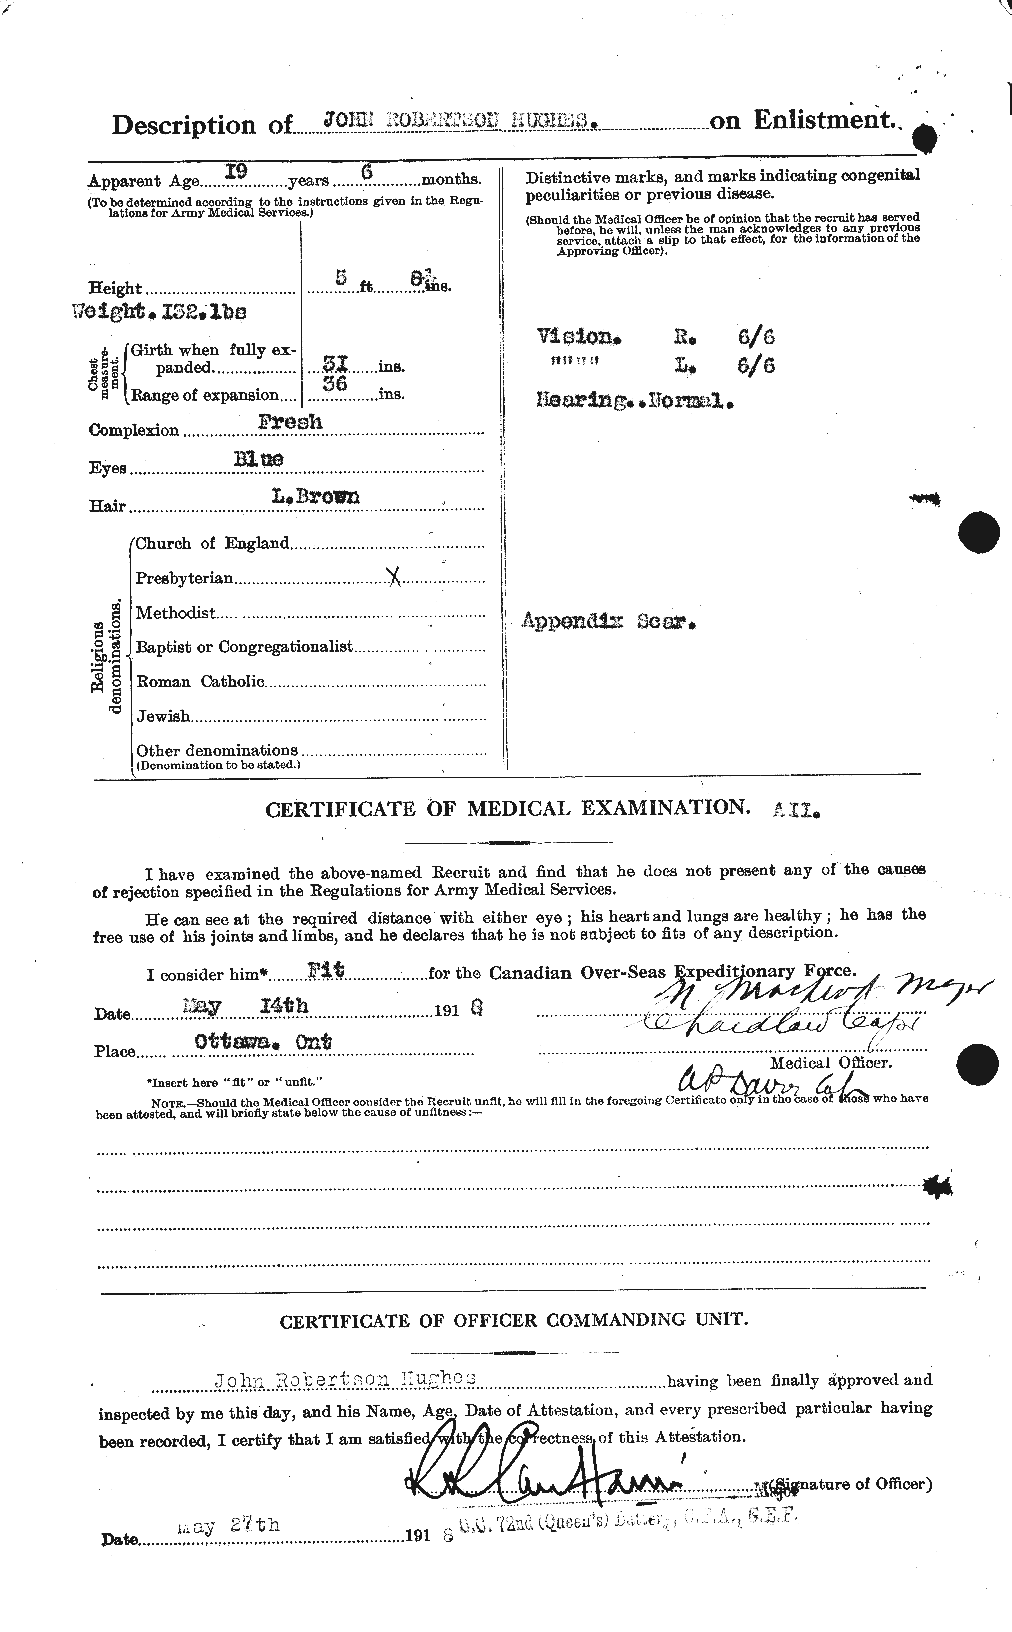 Personnel Records of the First World War - CEF 404047b